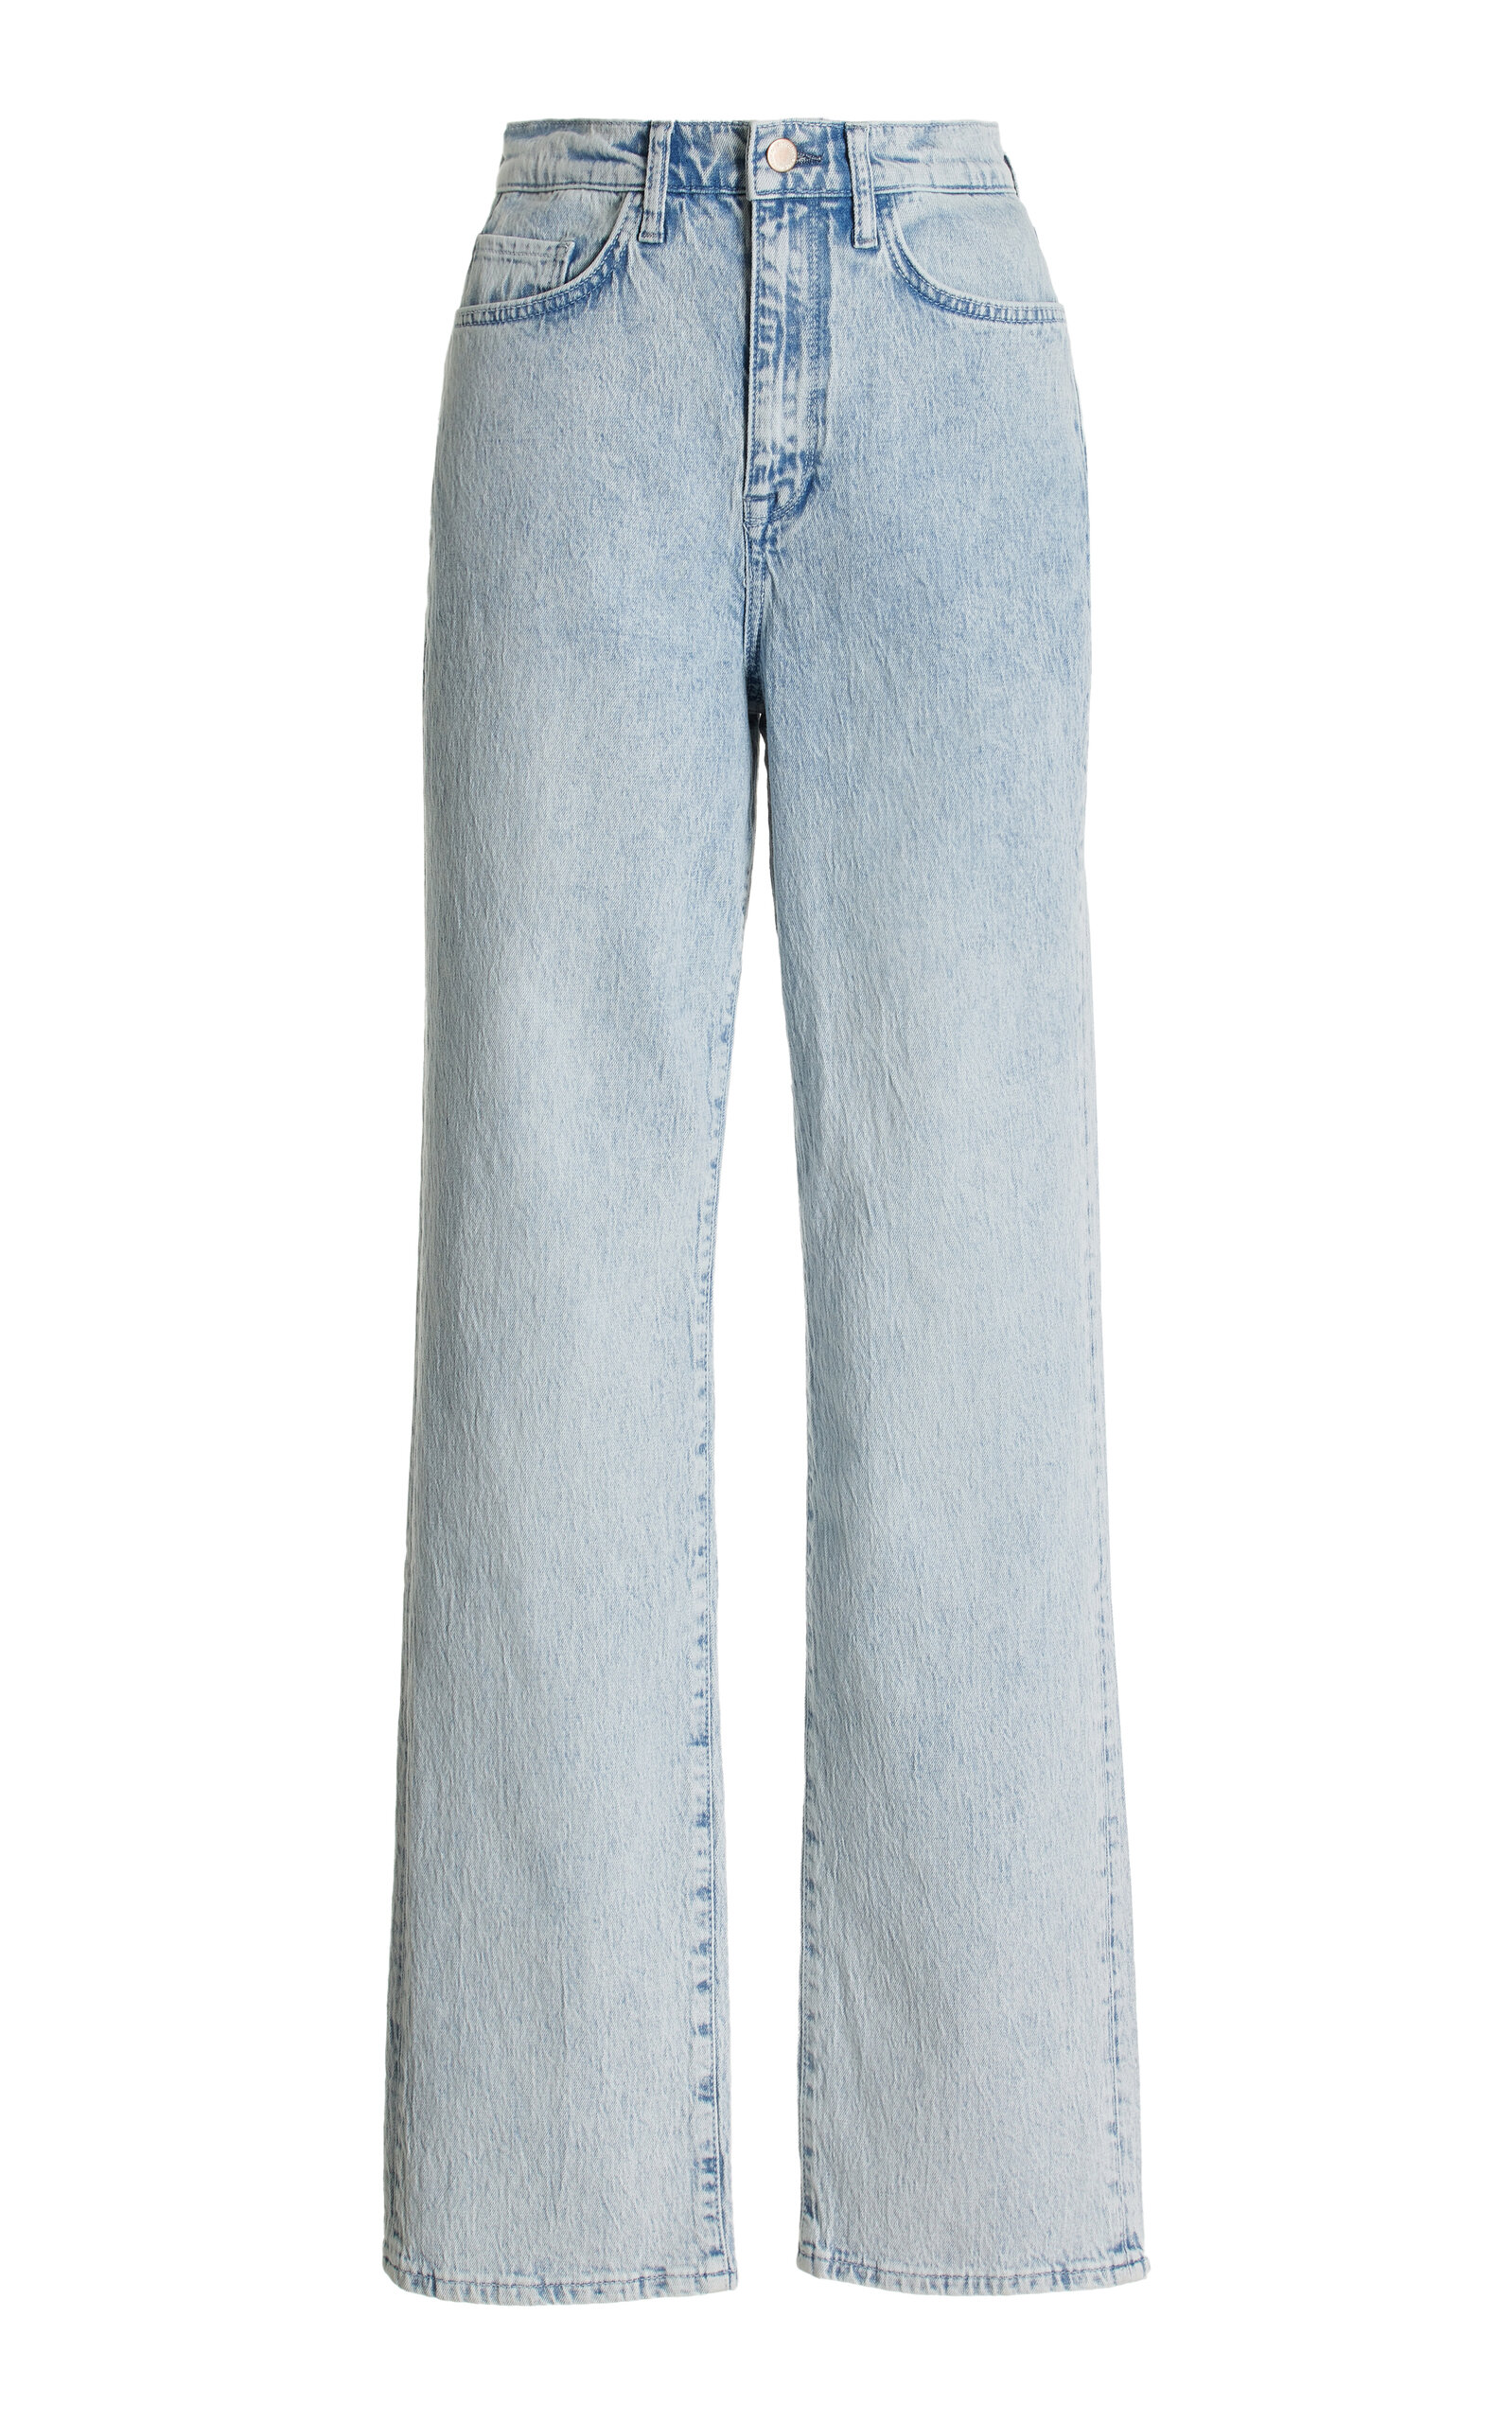 Ms. Triarchy High-Rise Straight-Leg Jeans